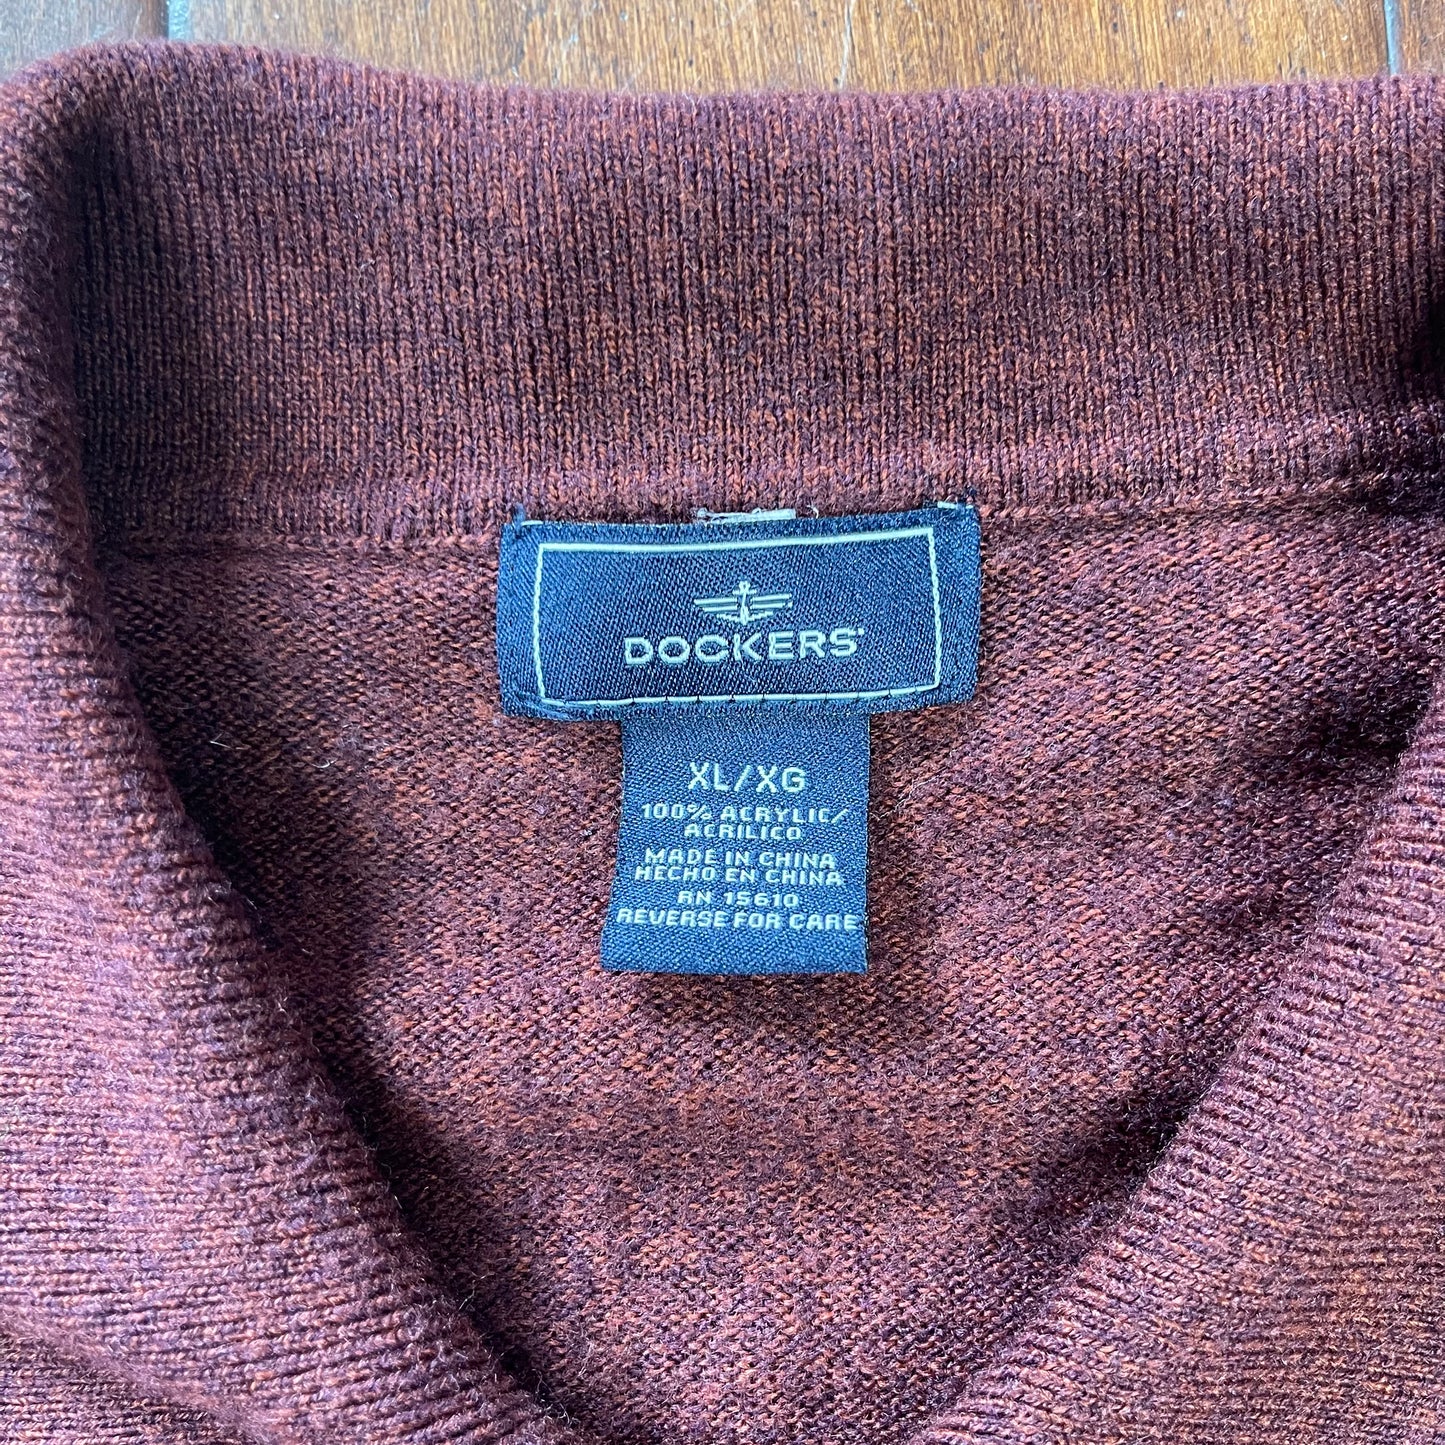 THRIFTED DOCKERS POLO SWEATER